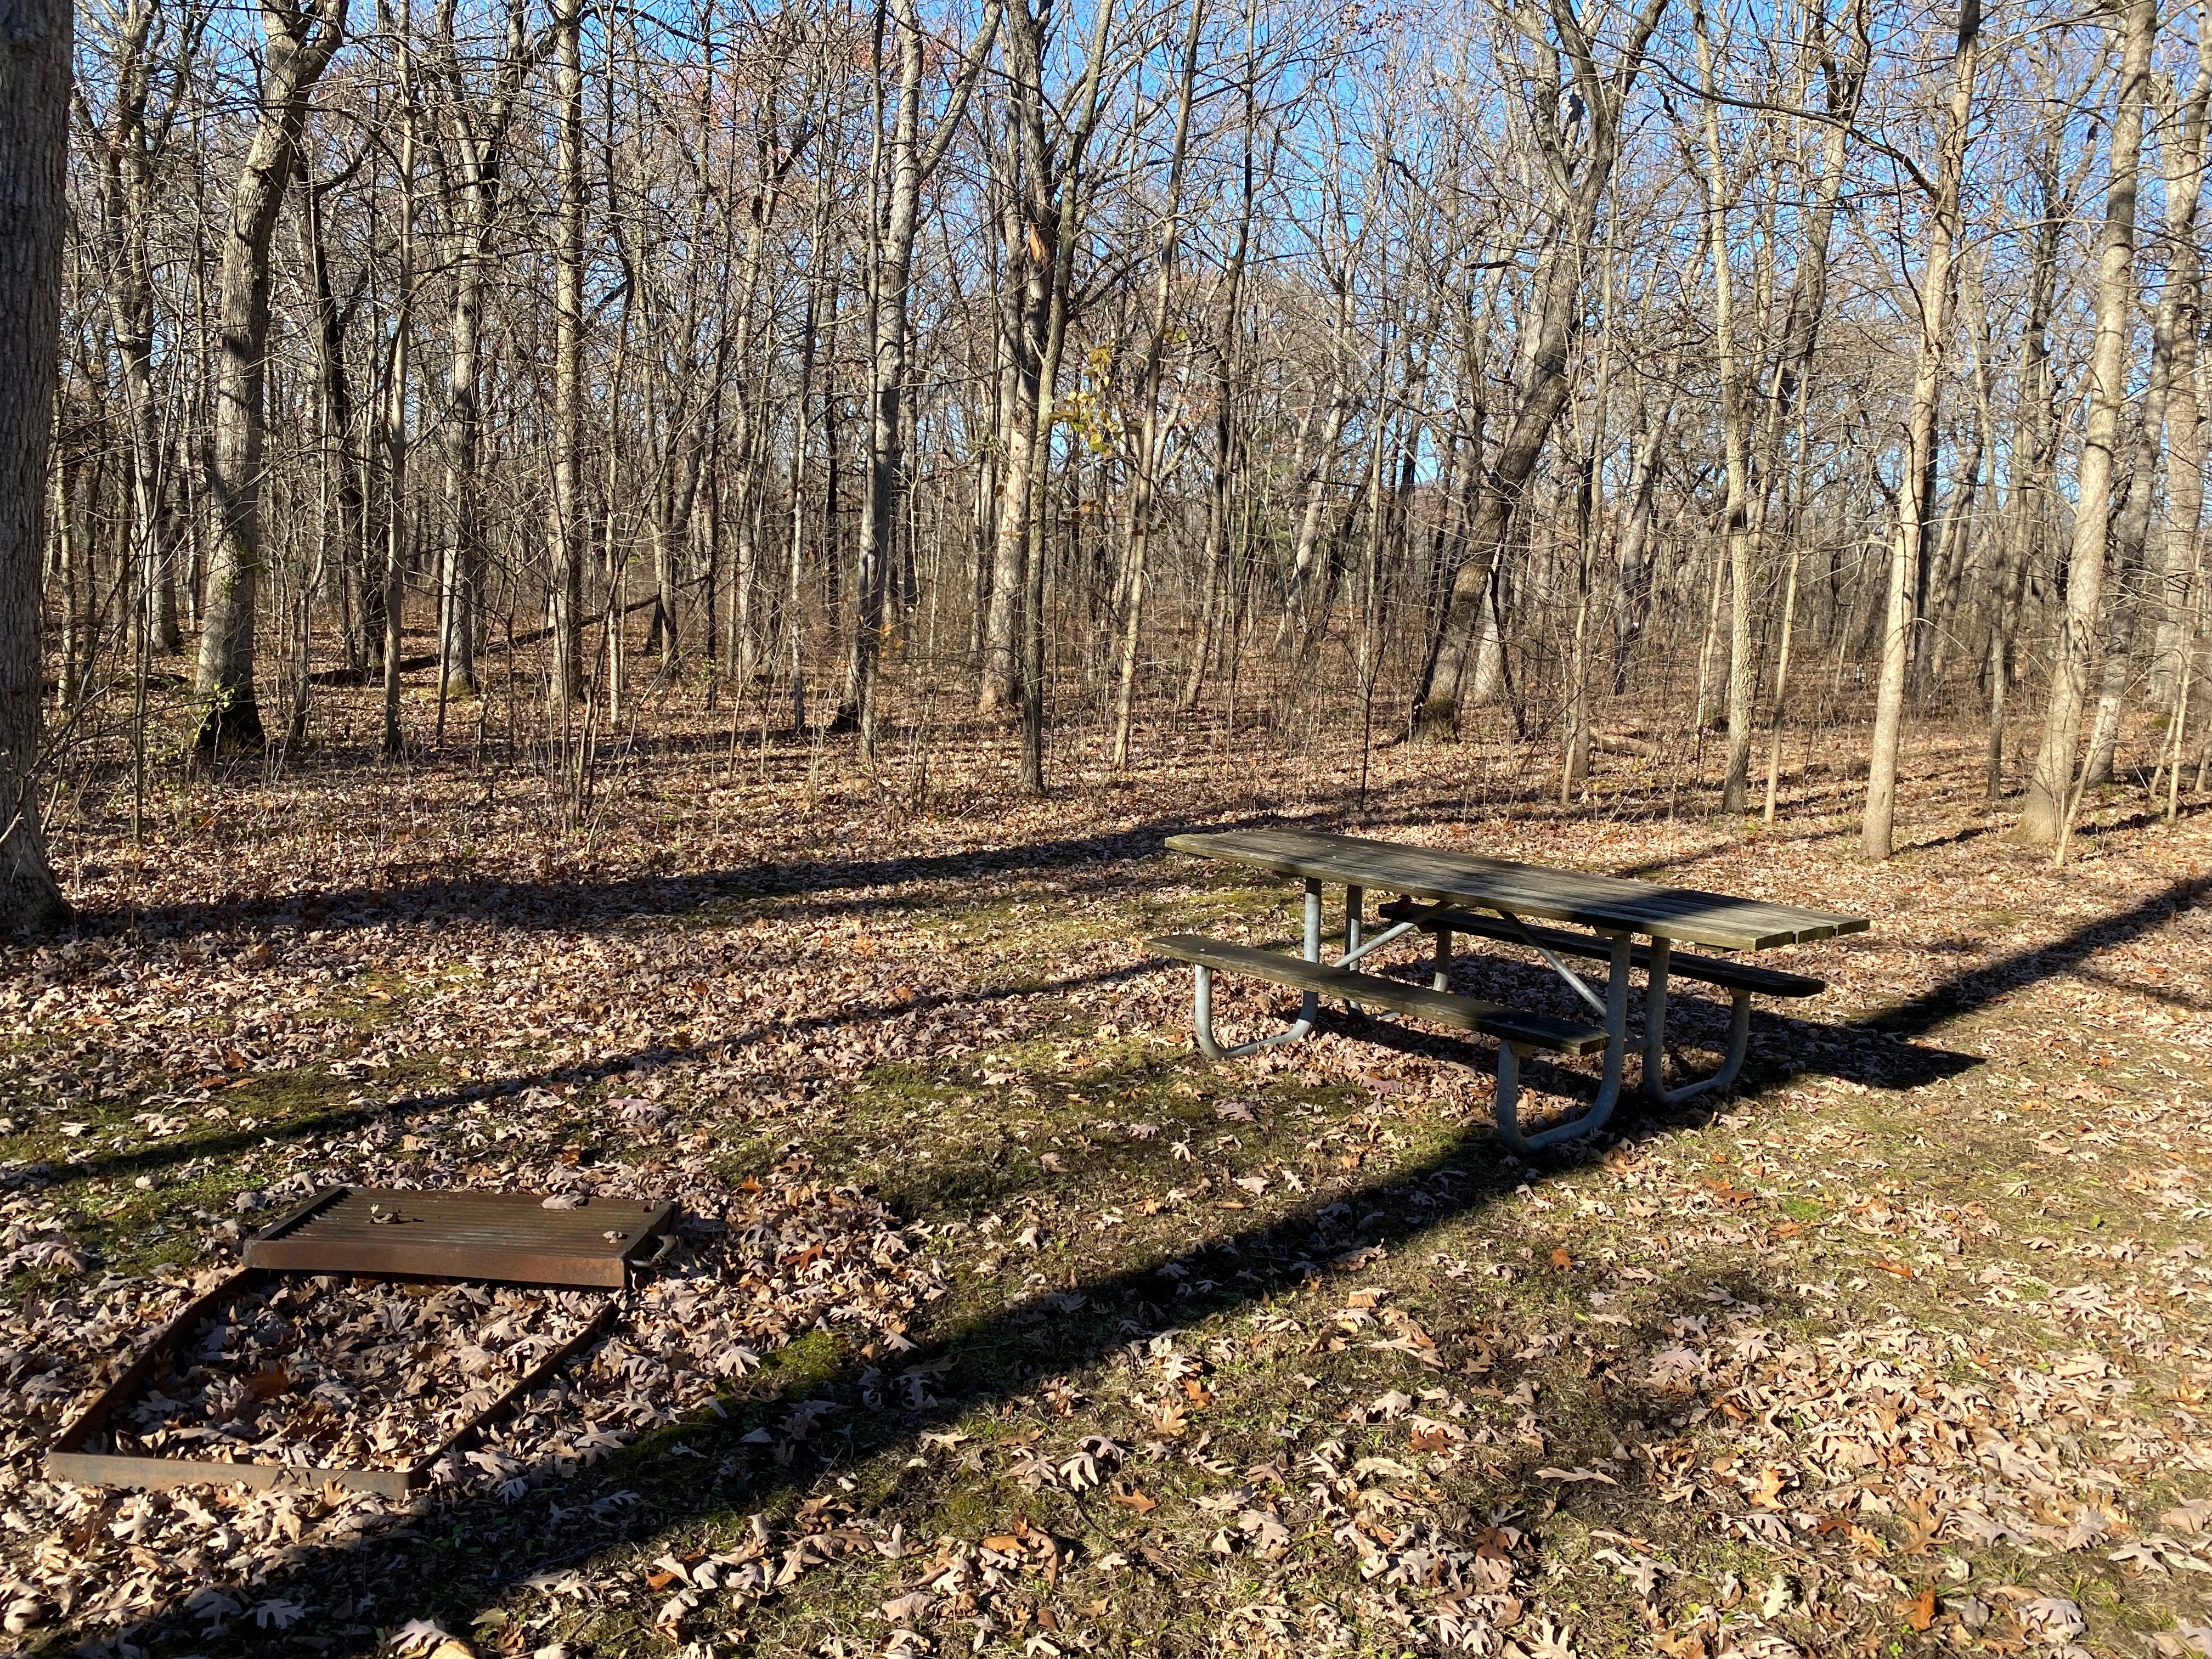 Camper submitted image from Hononegah Forest Preserve - 3